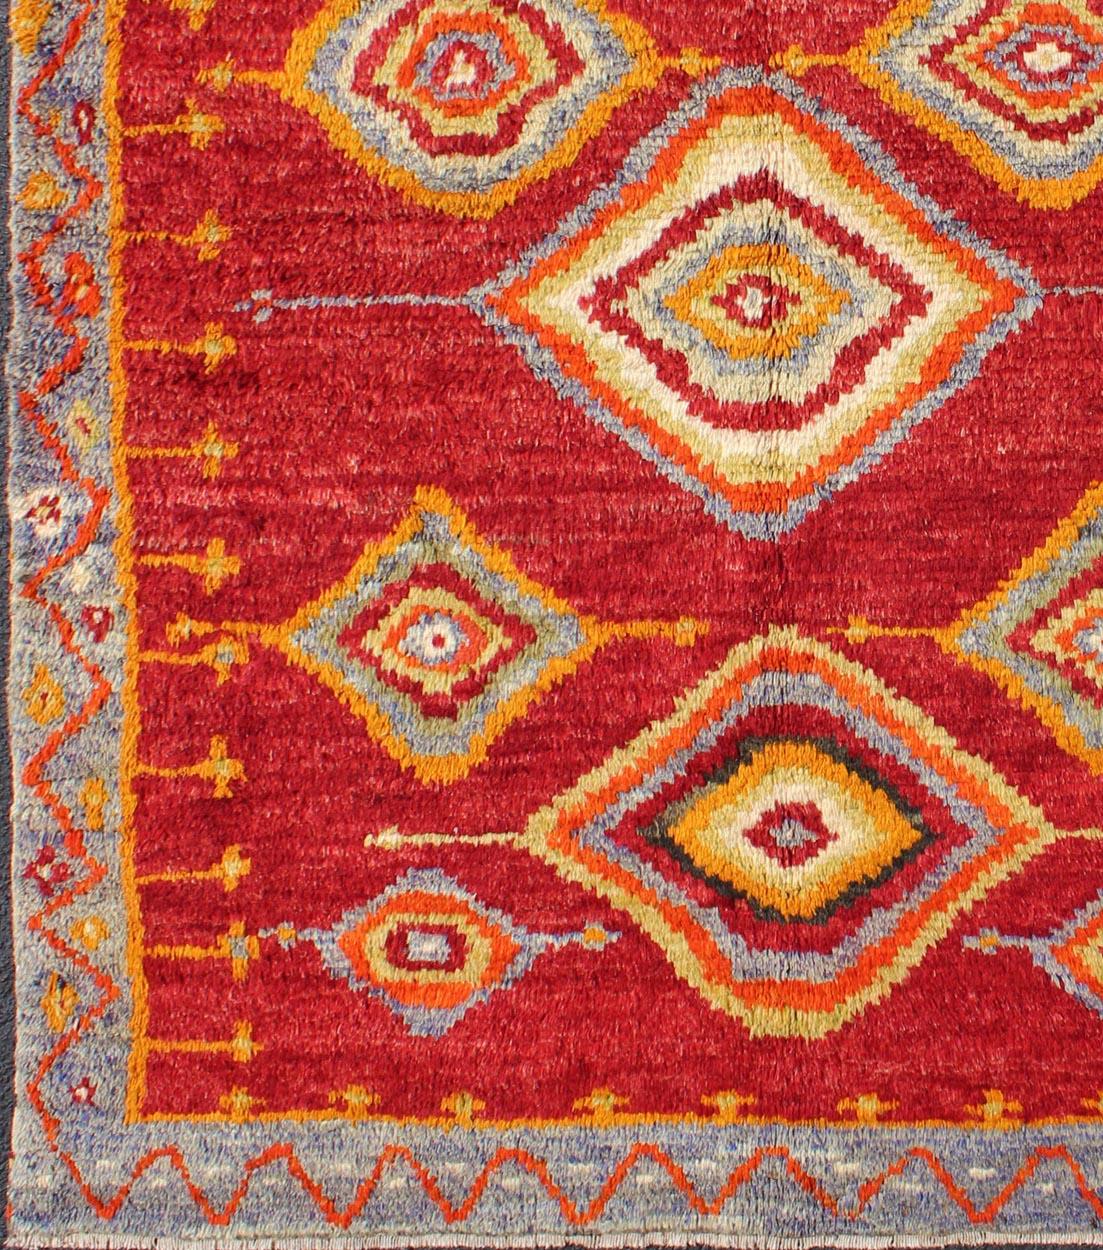 Tribal Turkish Konya Rug with Diamond Design in Beautiful Royal Red Background.
This brilliant Tribal Konya rug showcases a multi-layered diamond pattern with a range of green, orange, yellow and blue that glow in the bright red field. A light grey